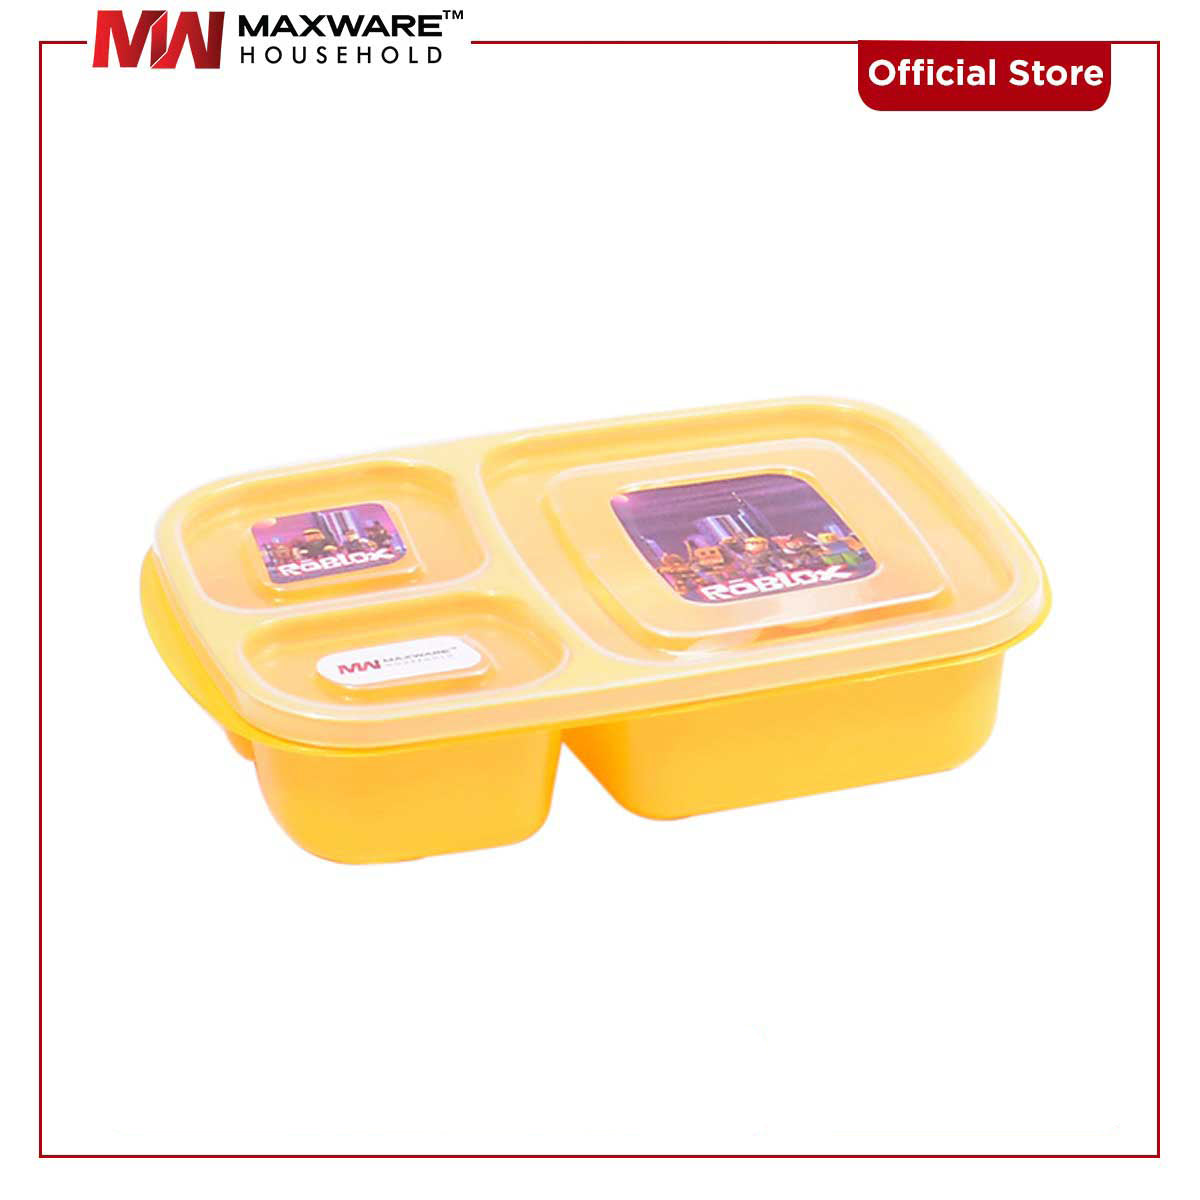 Student Lunch Box Large (1000 ml)